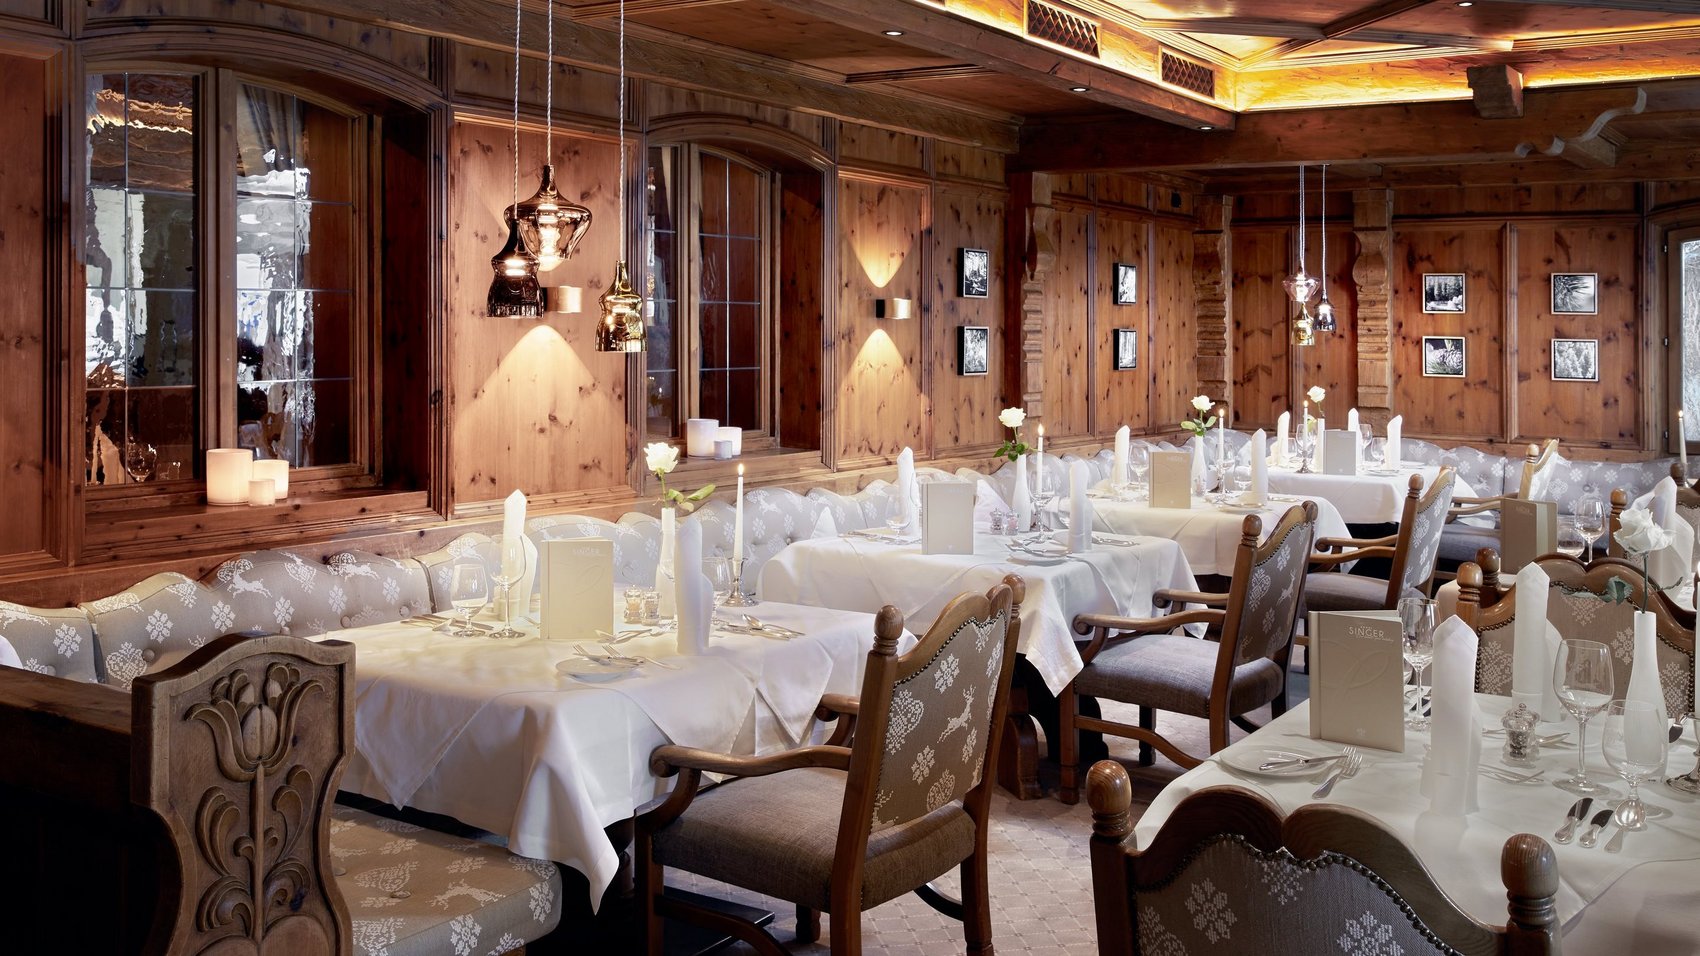 The restaurant in Tyrol for gourmets